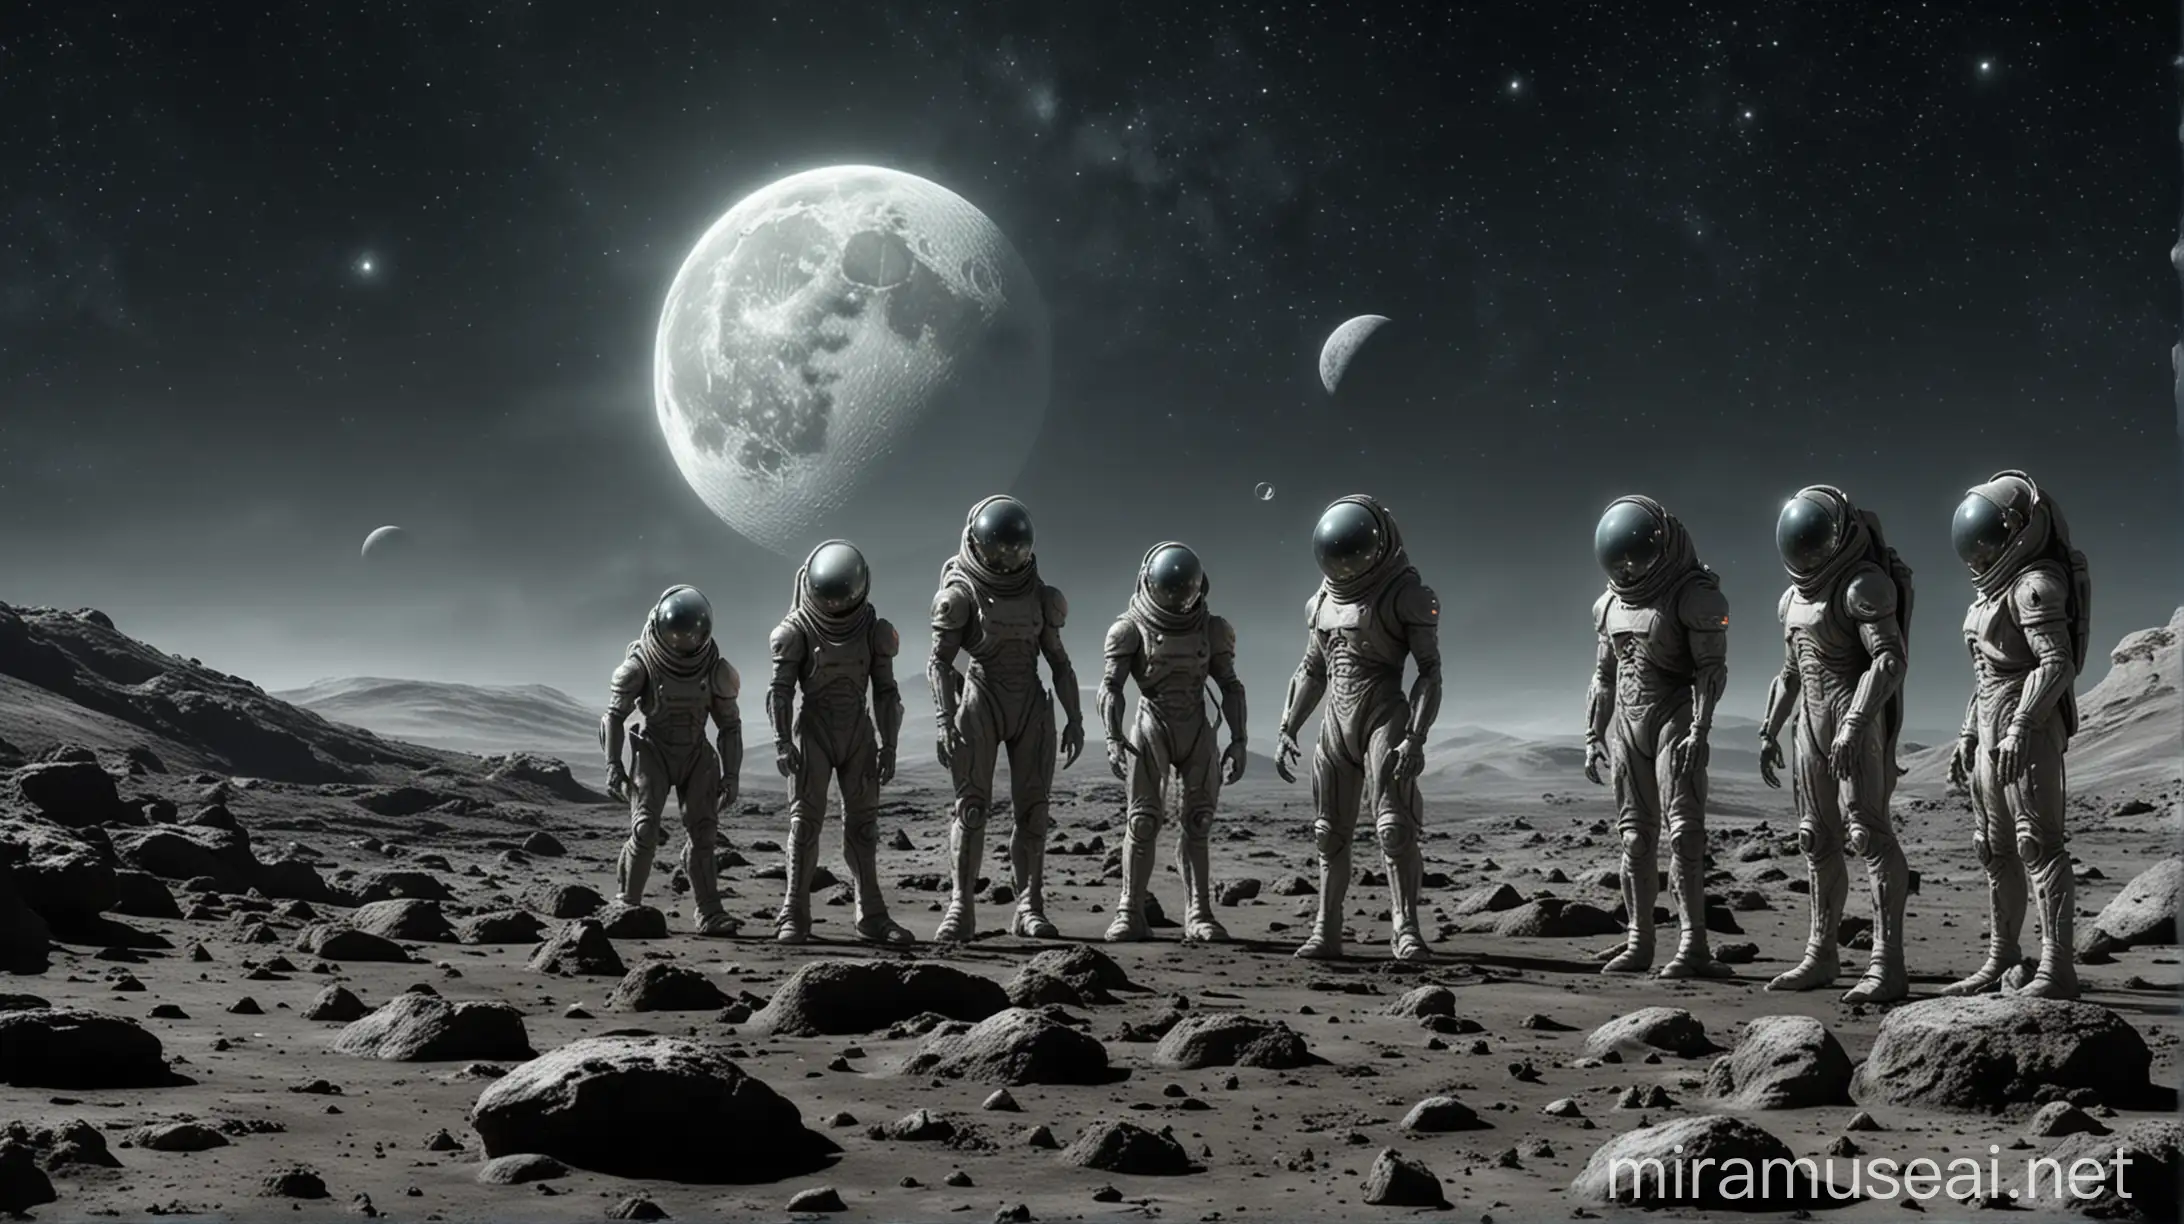 Create an image of a group of aliens on the moon. The aliens should be diverse in appearance, with varying sizes, colors, and shapes. They are exploring the lunar surface, examining moon rocks, and interacting with each other. The background should feature the Earth visible in the distance, with the moon's gray, cratered landscape under a star-filled sky. Some advanced alien technology, like futuristic vehicles or equipment, should be present, adding a sense of wonder and intrigue to the scene